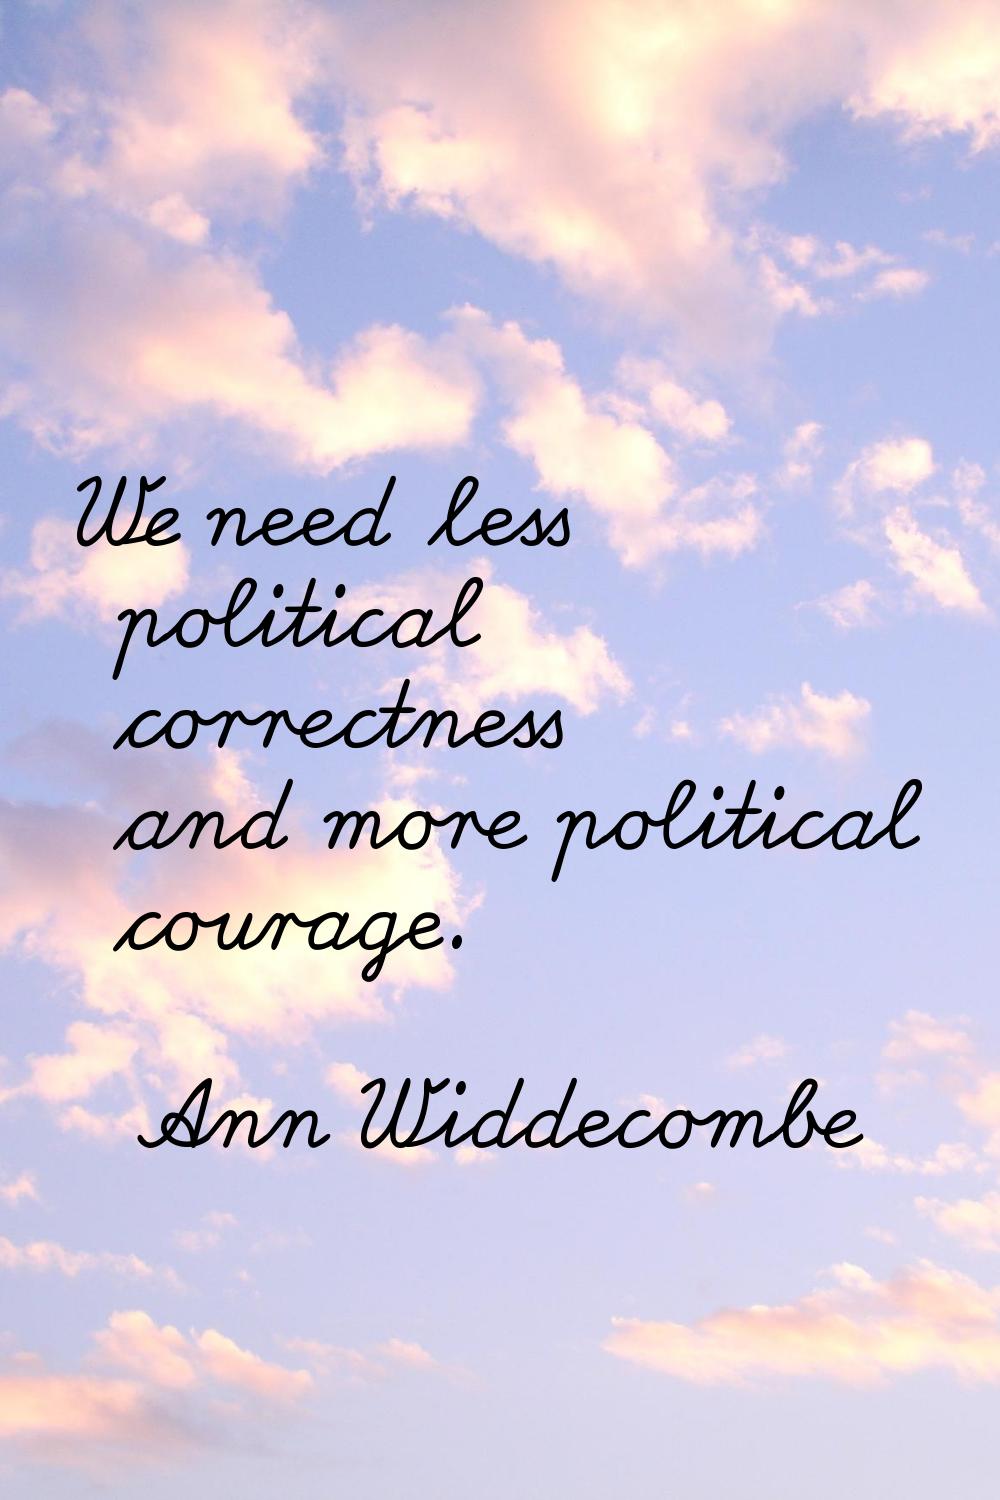 We need less political correctness and more political courage.